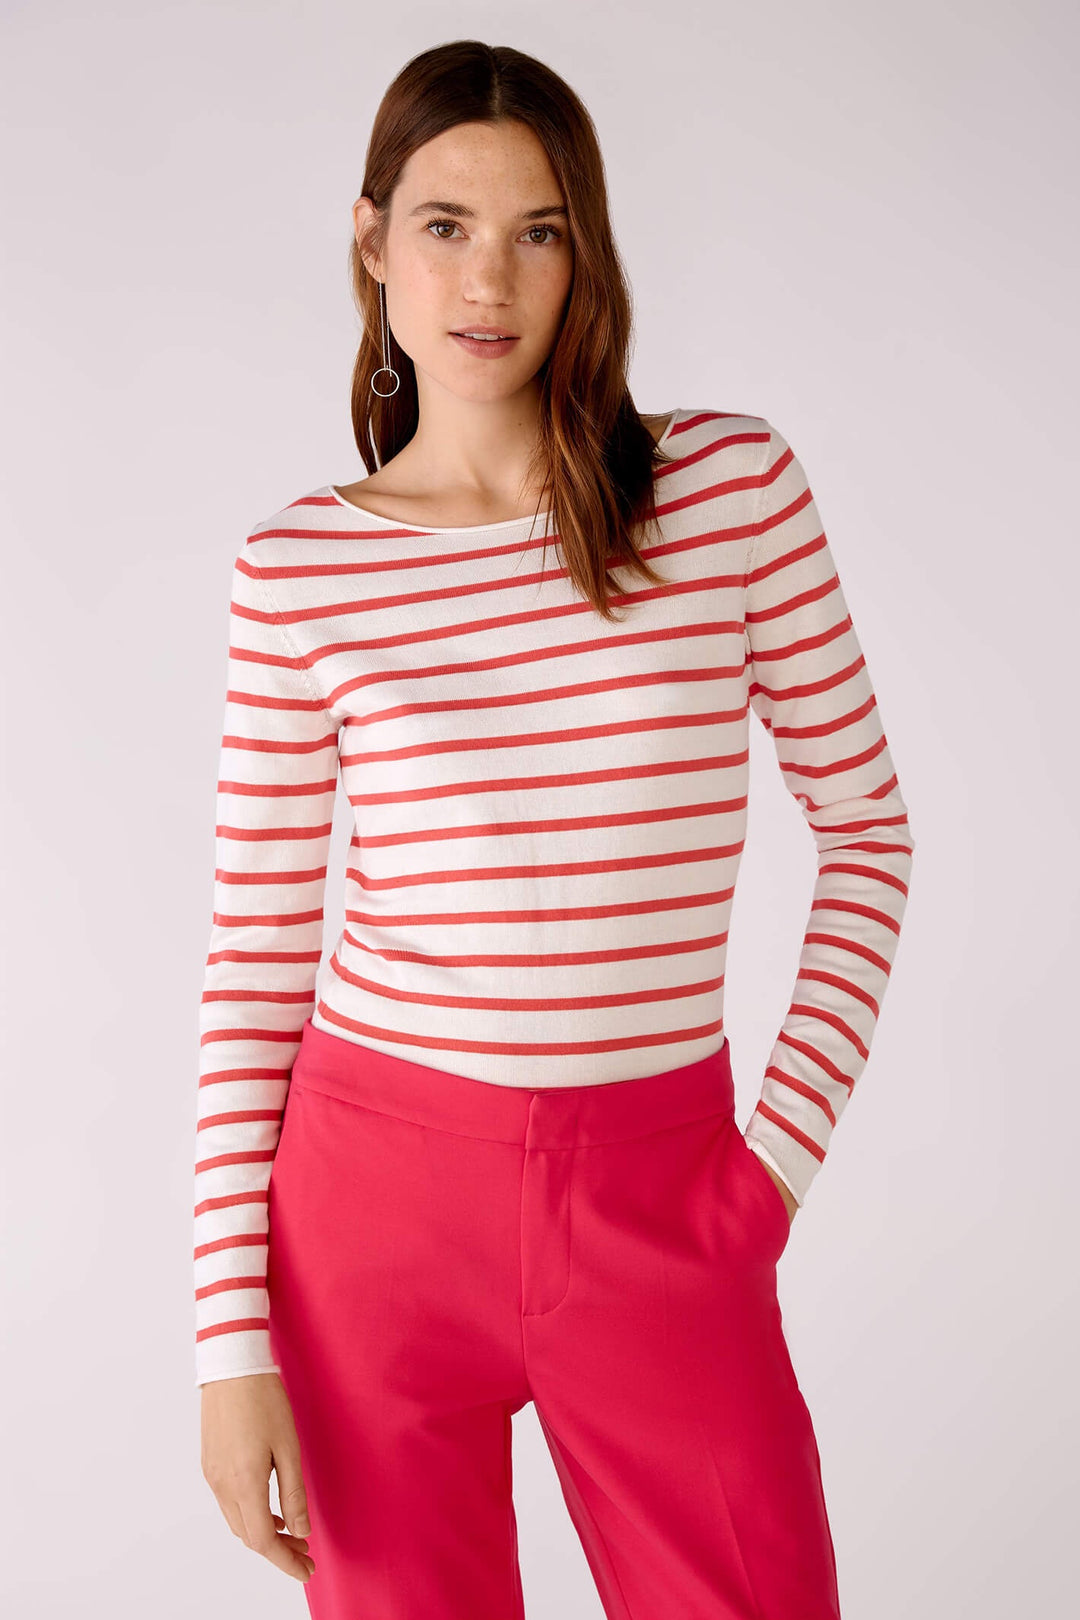 Oui 78778 Pink White Striped Wide Neck Jumper - Dotique Chesterfield